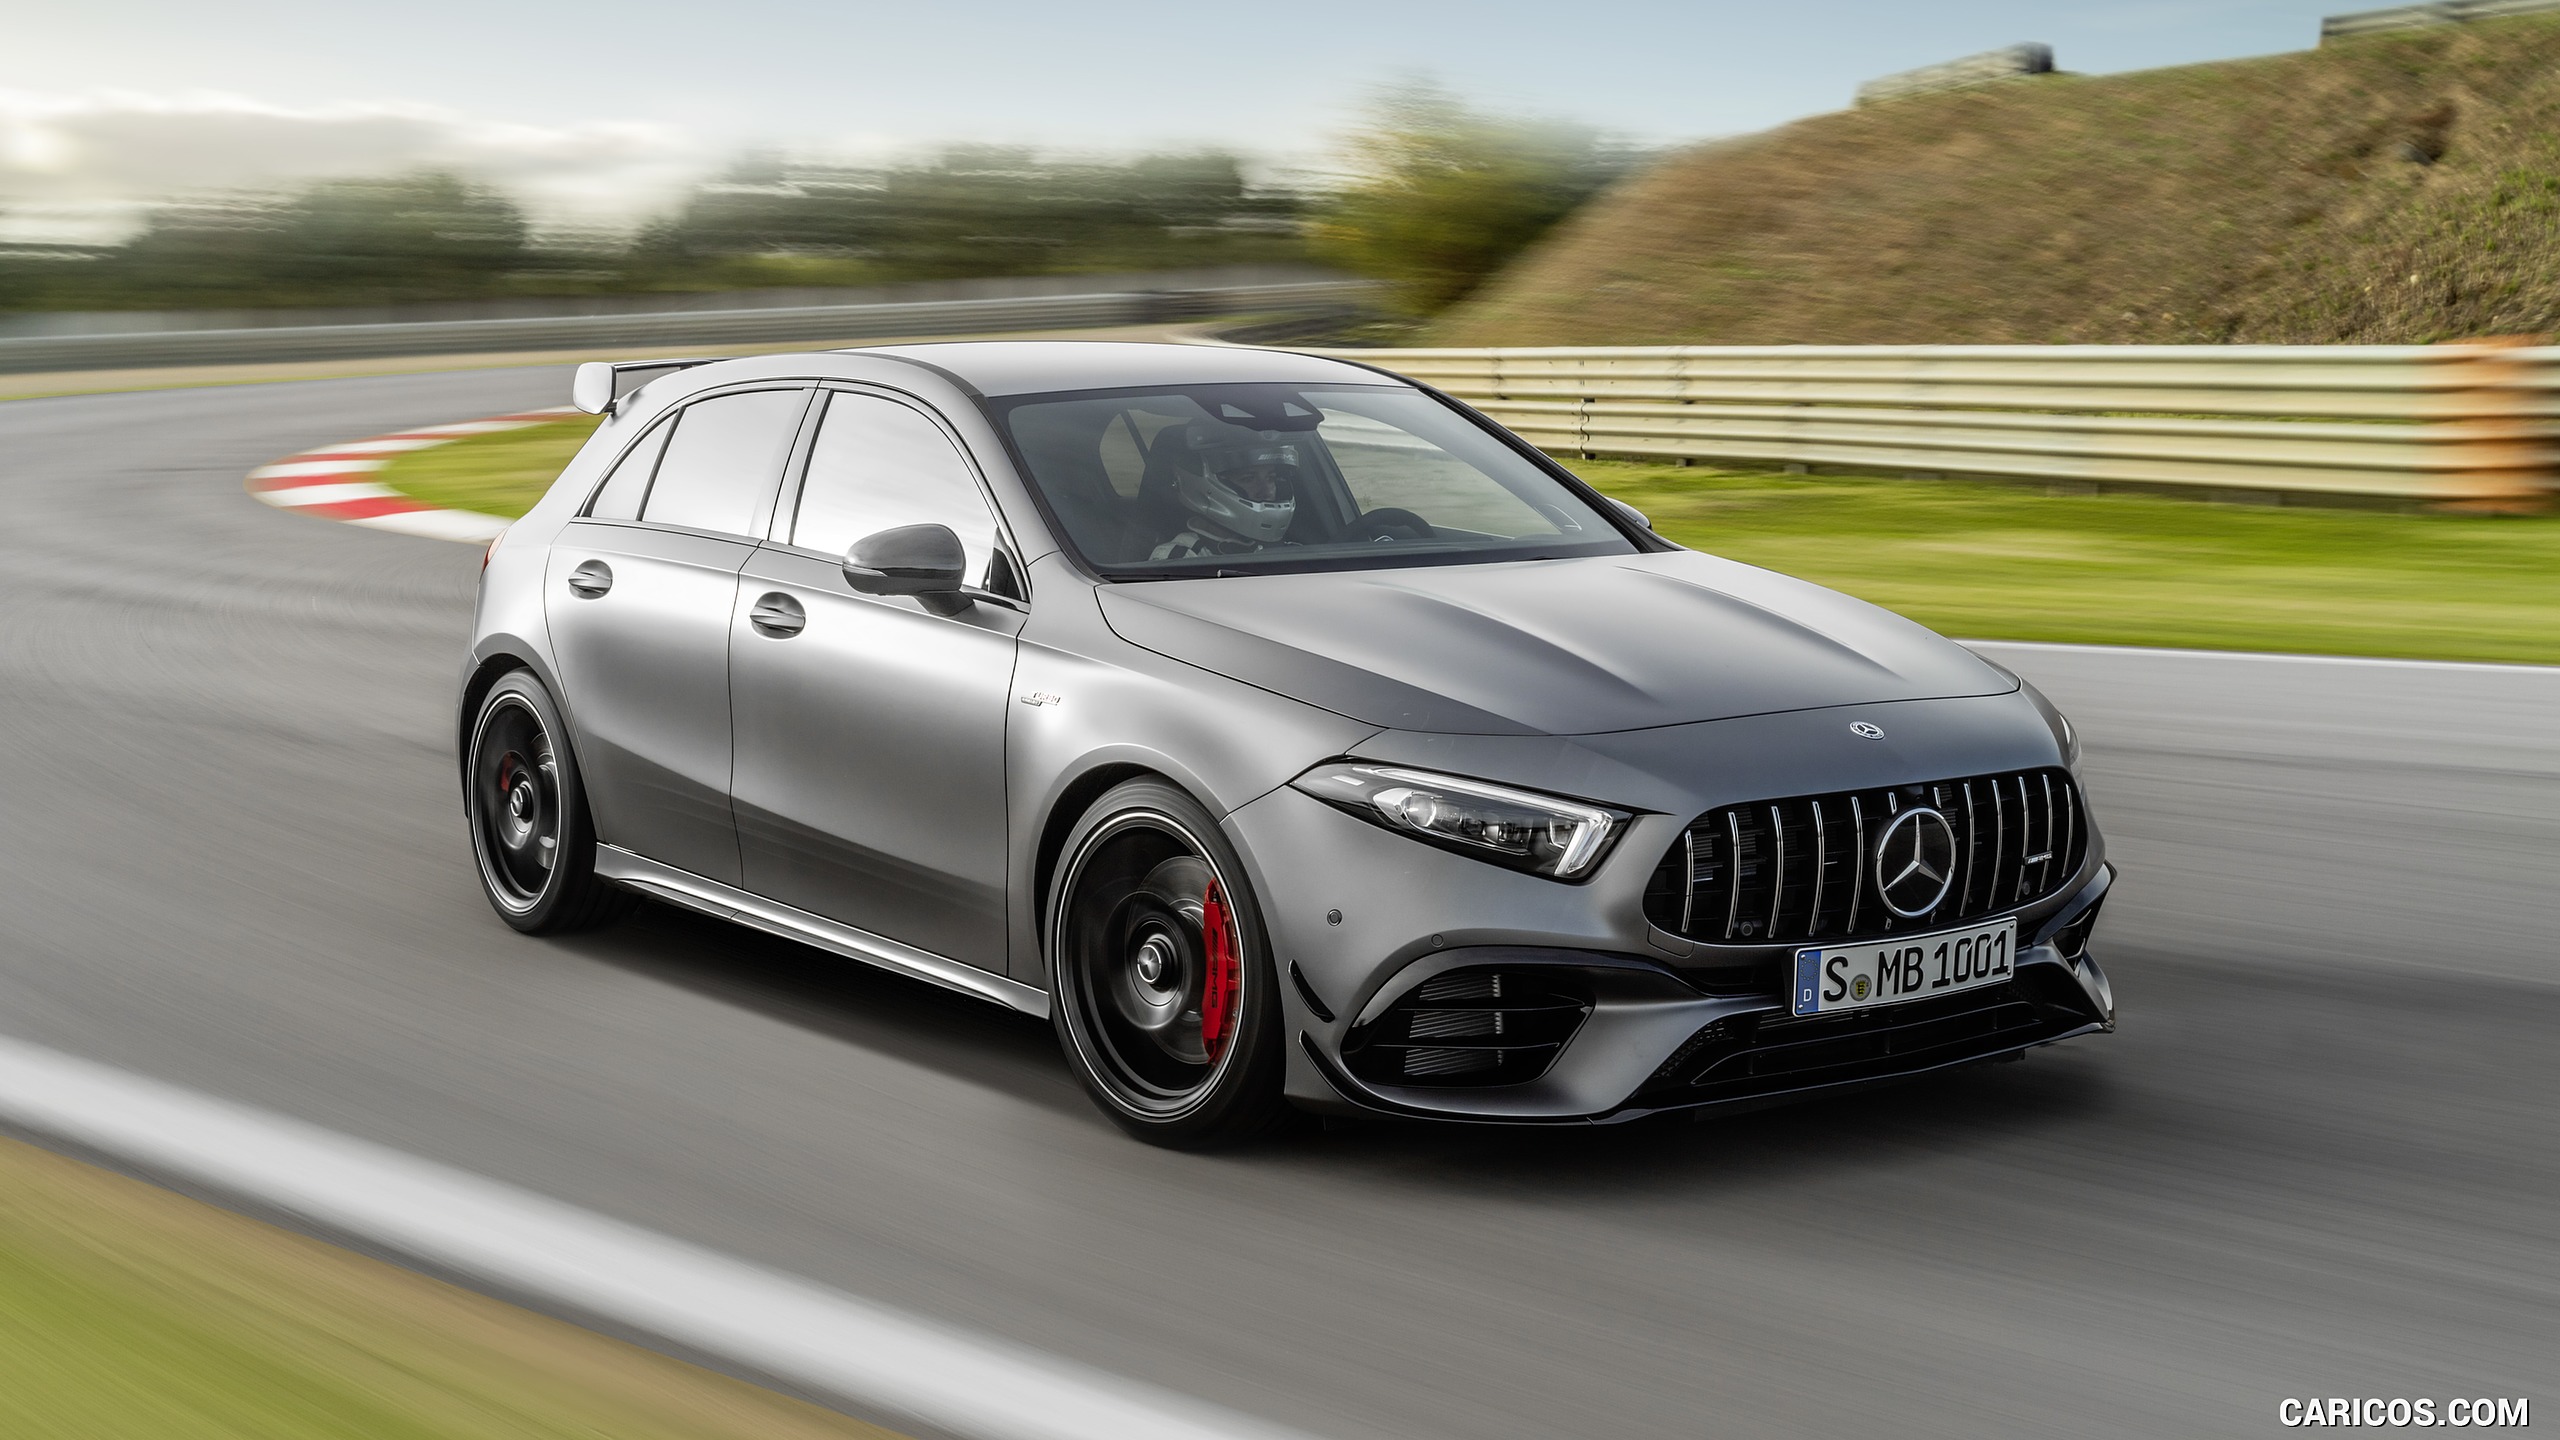 2020 Mercedes-AMG A 45 S 4MATIC+ - Front, #5 of 188